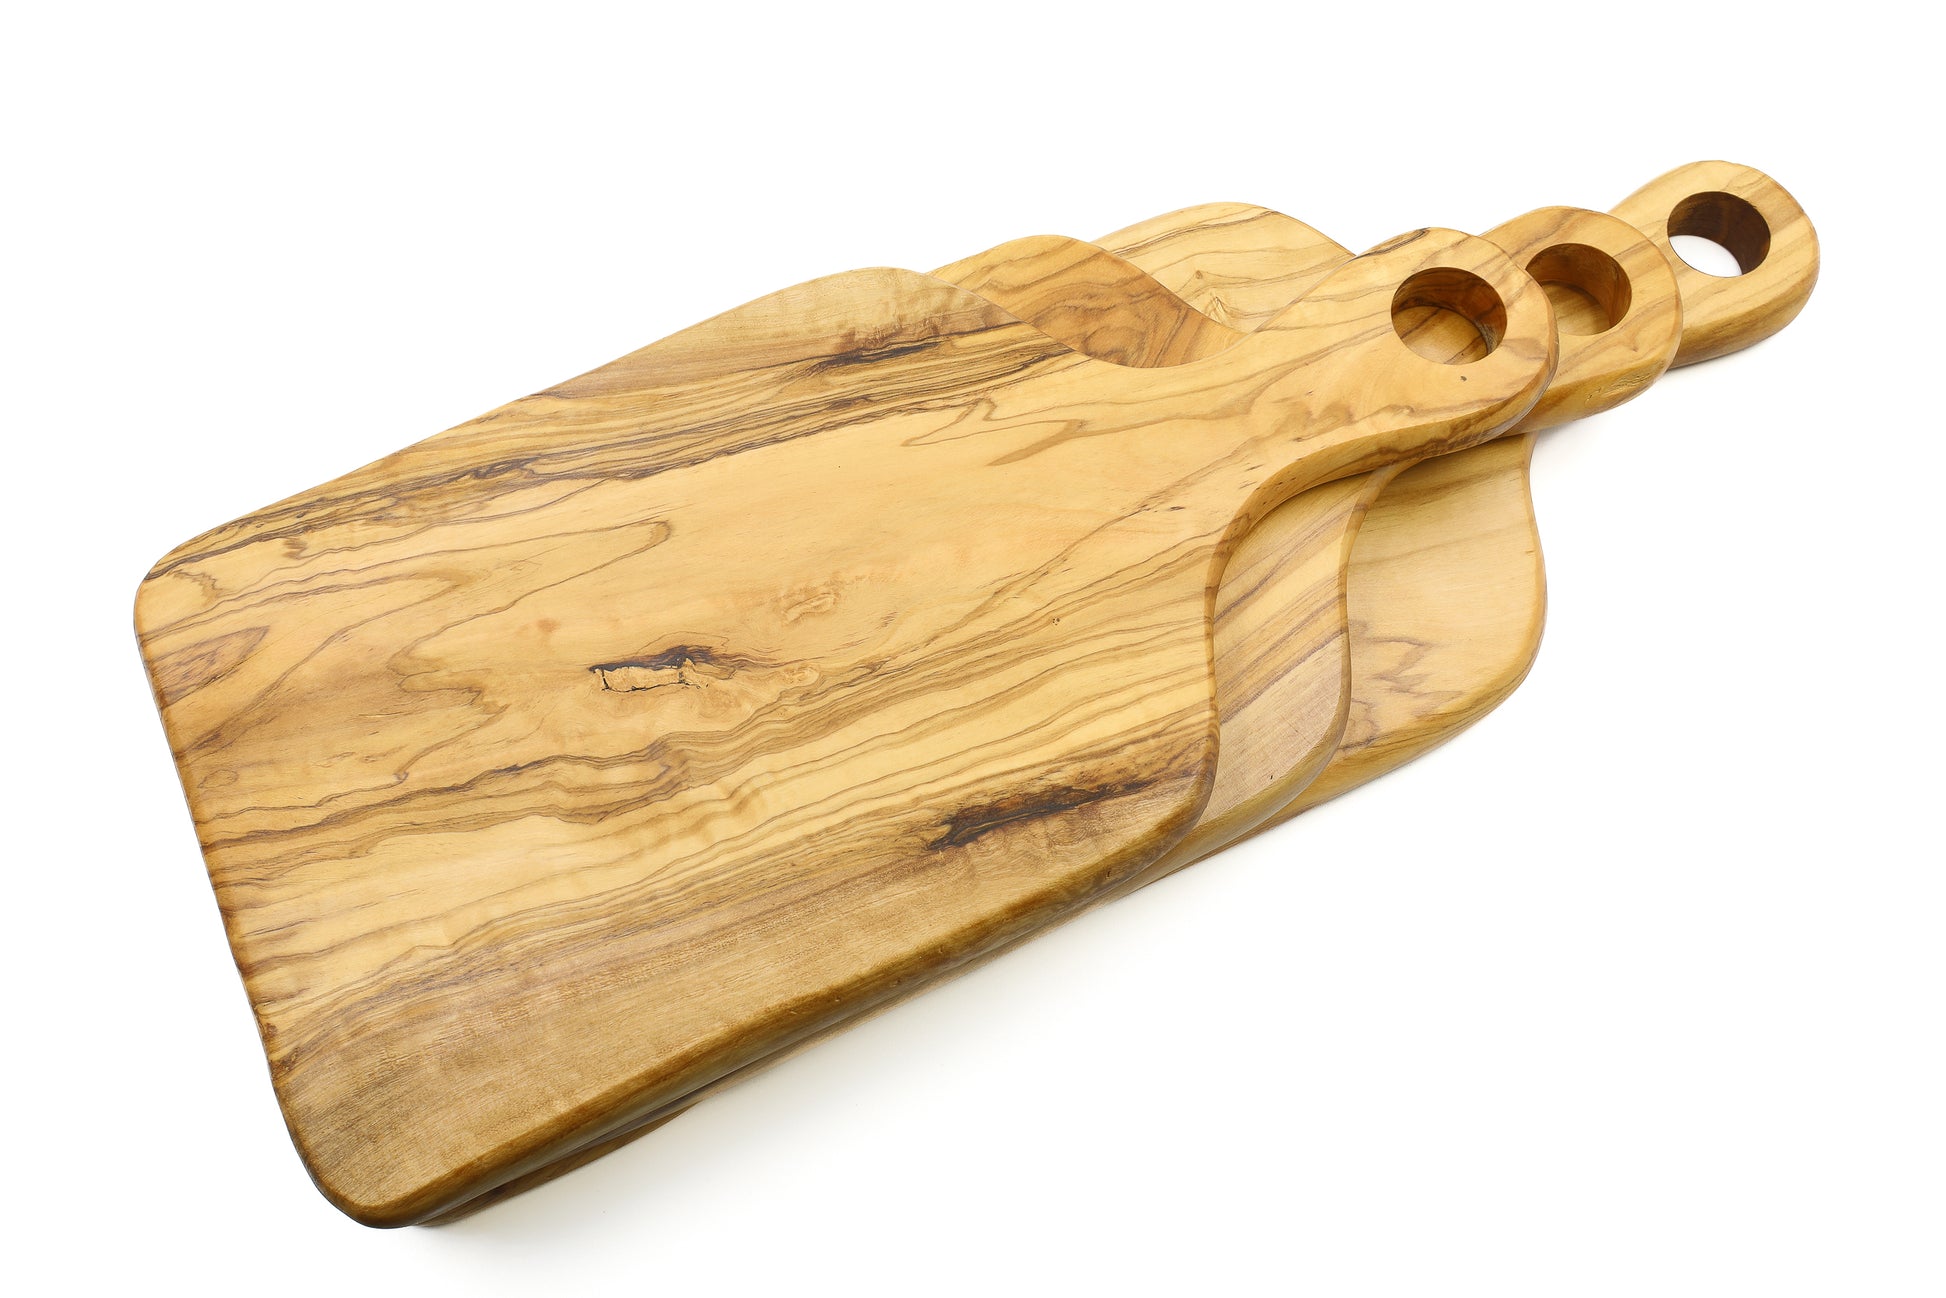 Rustic olive wood paddle-shaped cutting board with a sturdy handle